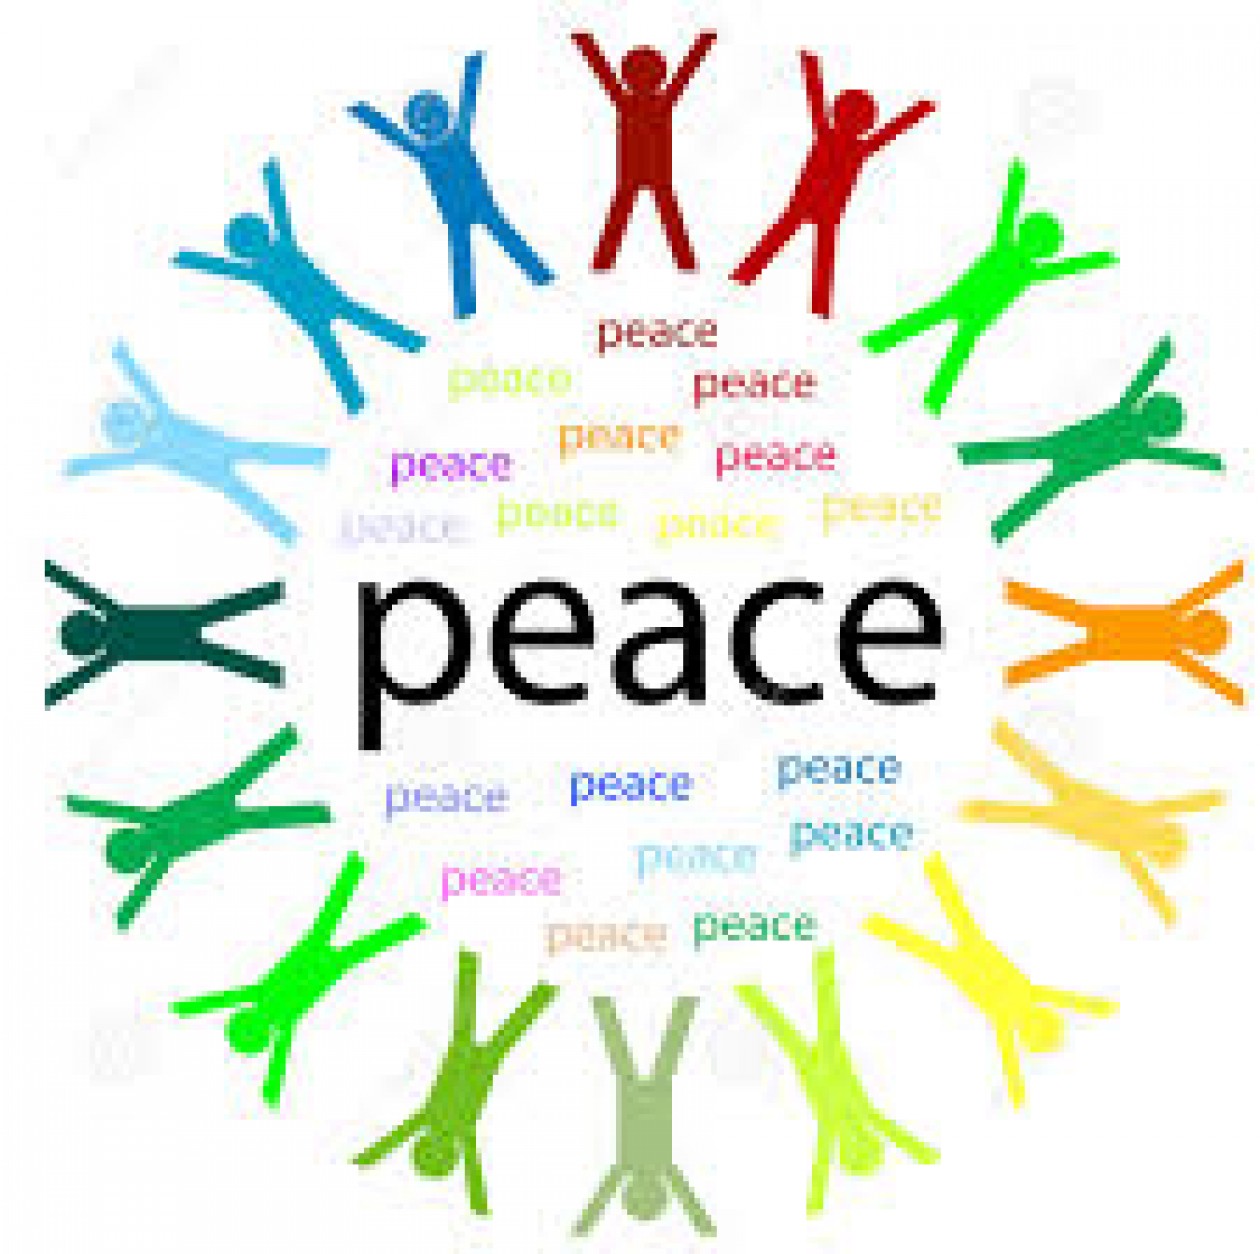 International Peace Day Essay, Speech, Slogans, Quotes, Posters